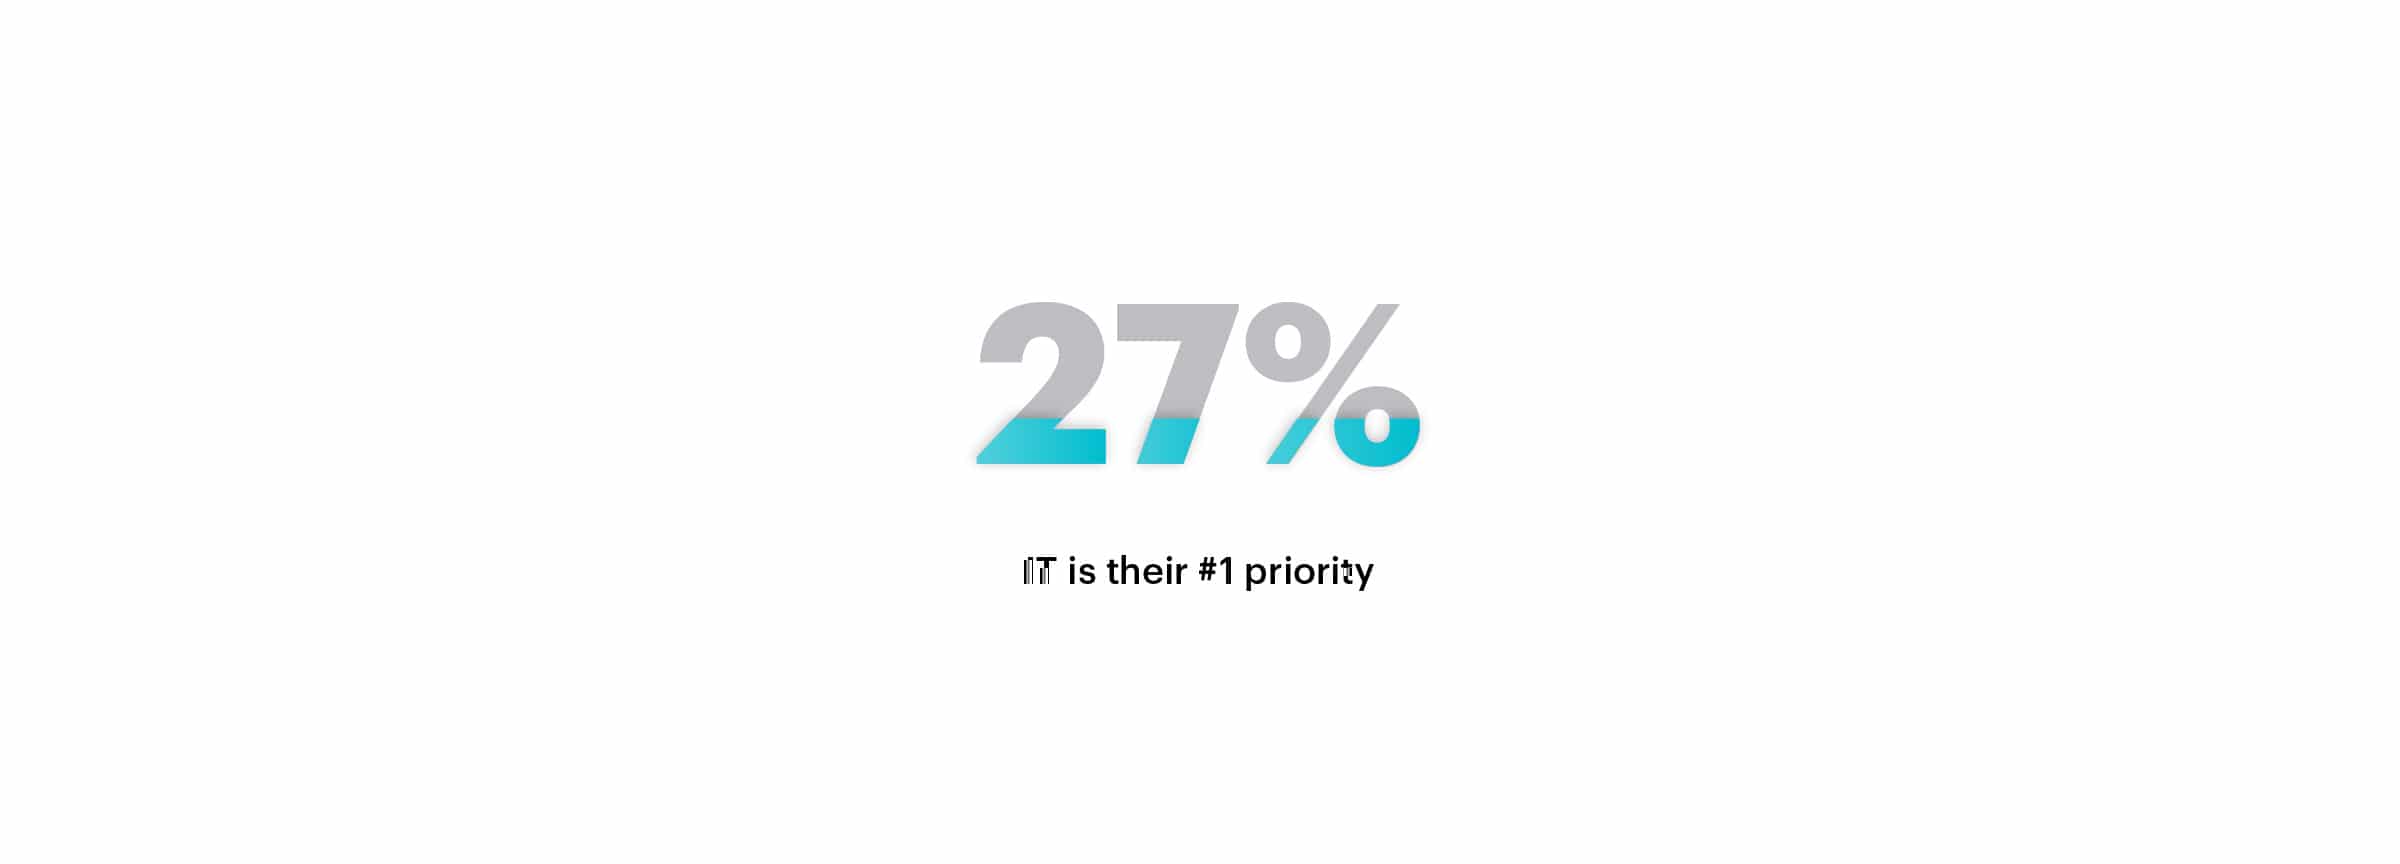 275 ecommerce shop owners say IT is their #1 priority.